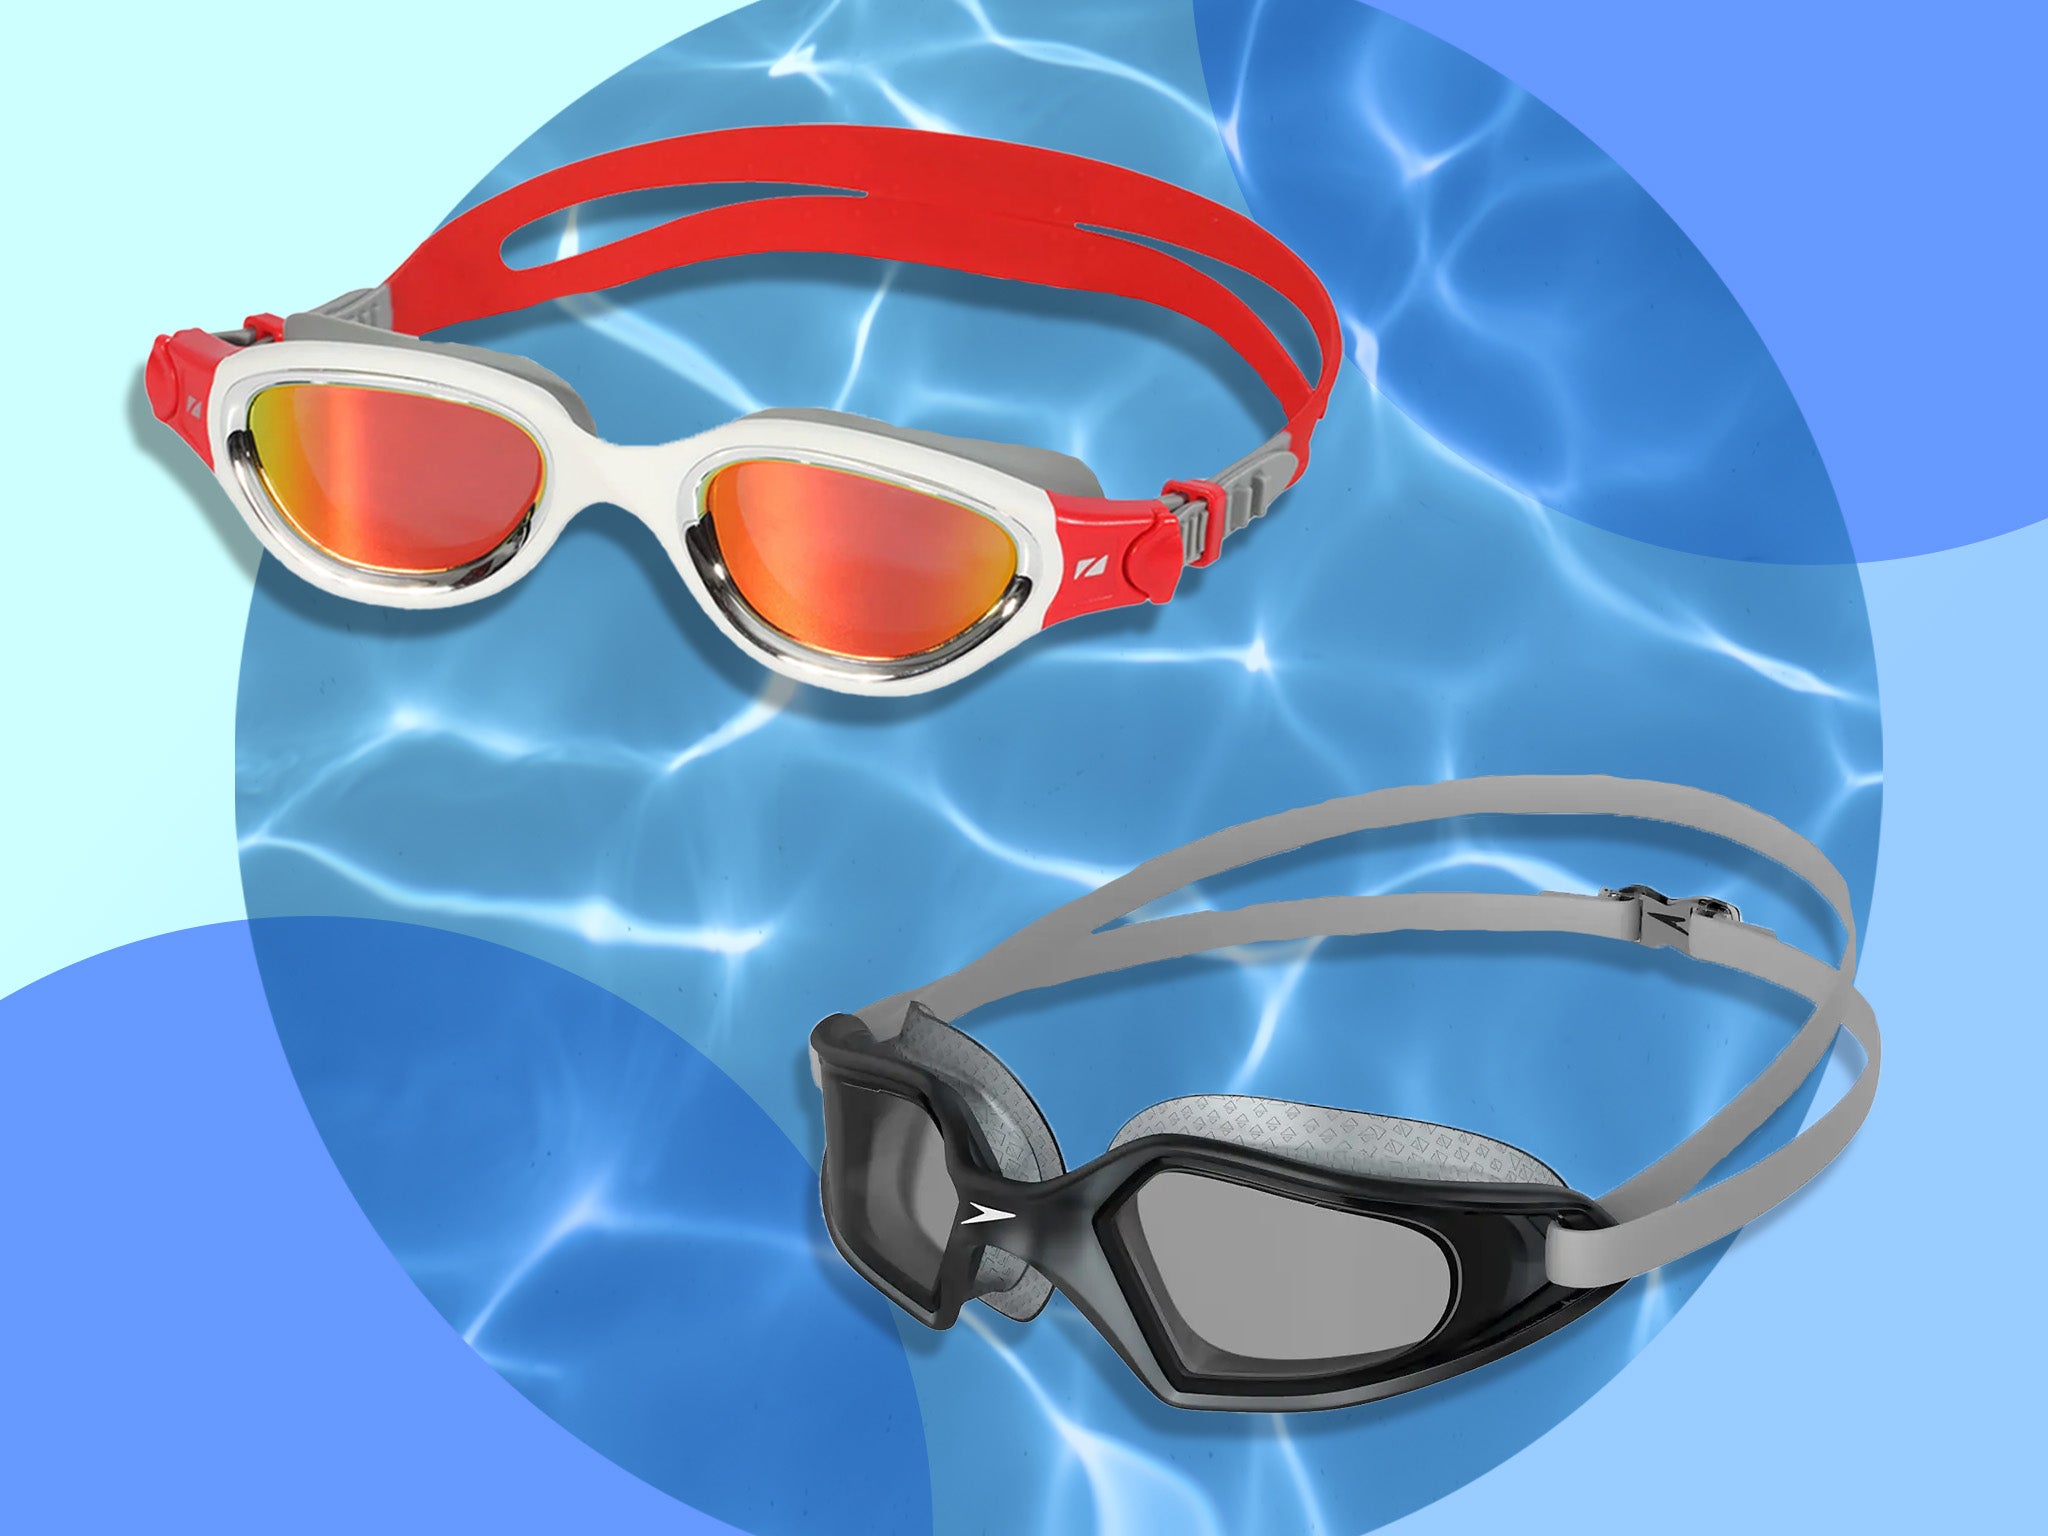 Letsfit Swim Goggles No Leaking Anti-Fog Indoor Outdoor Swimming Goggles with UV Protection Mirrored Lenses 